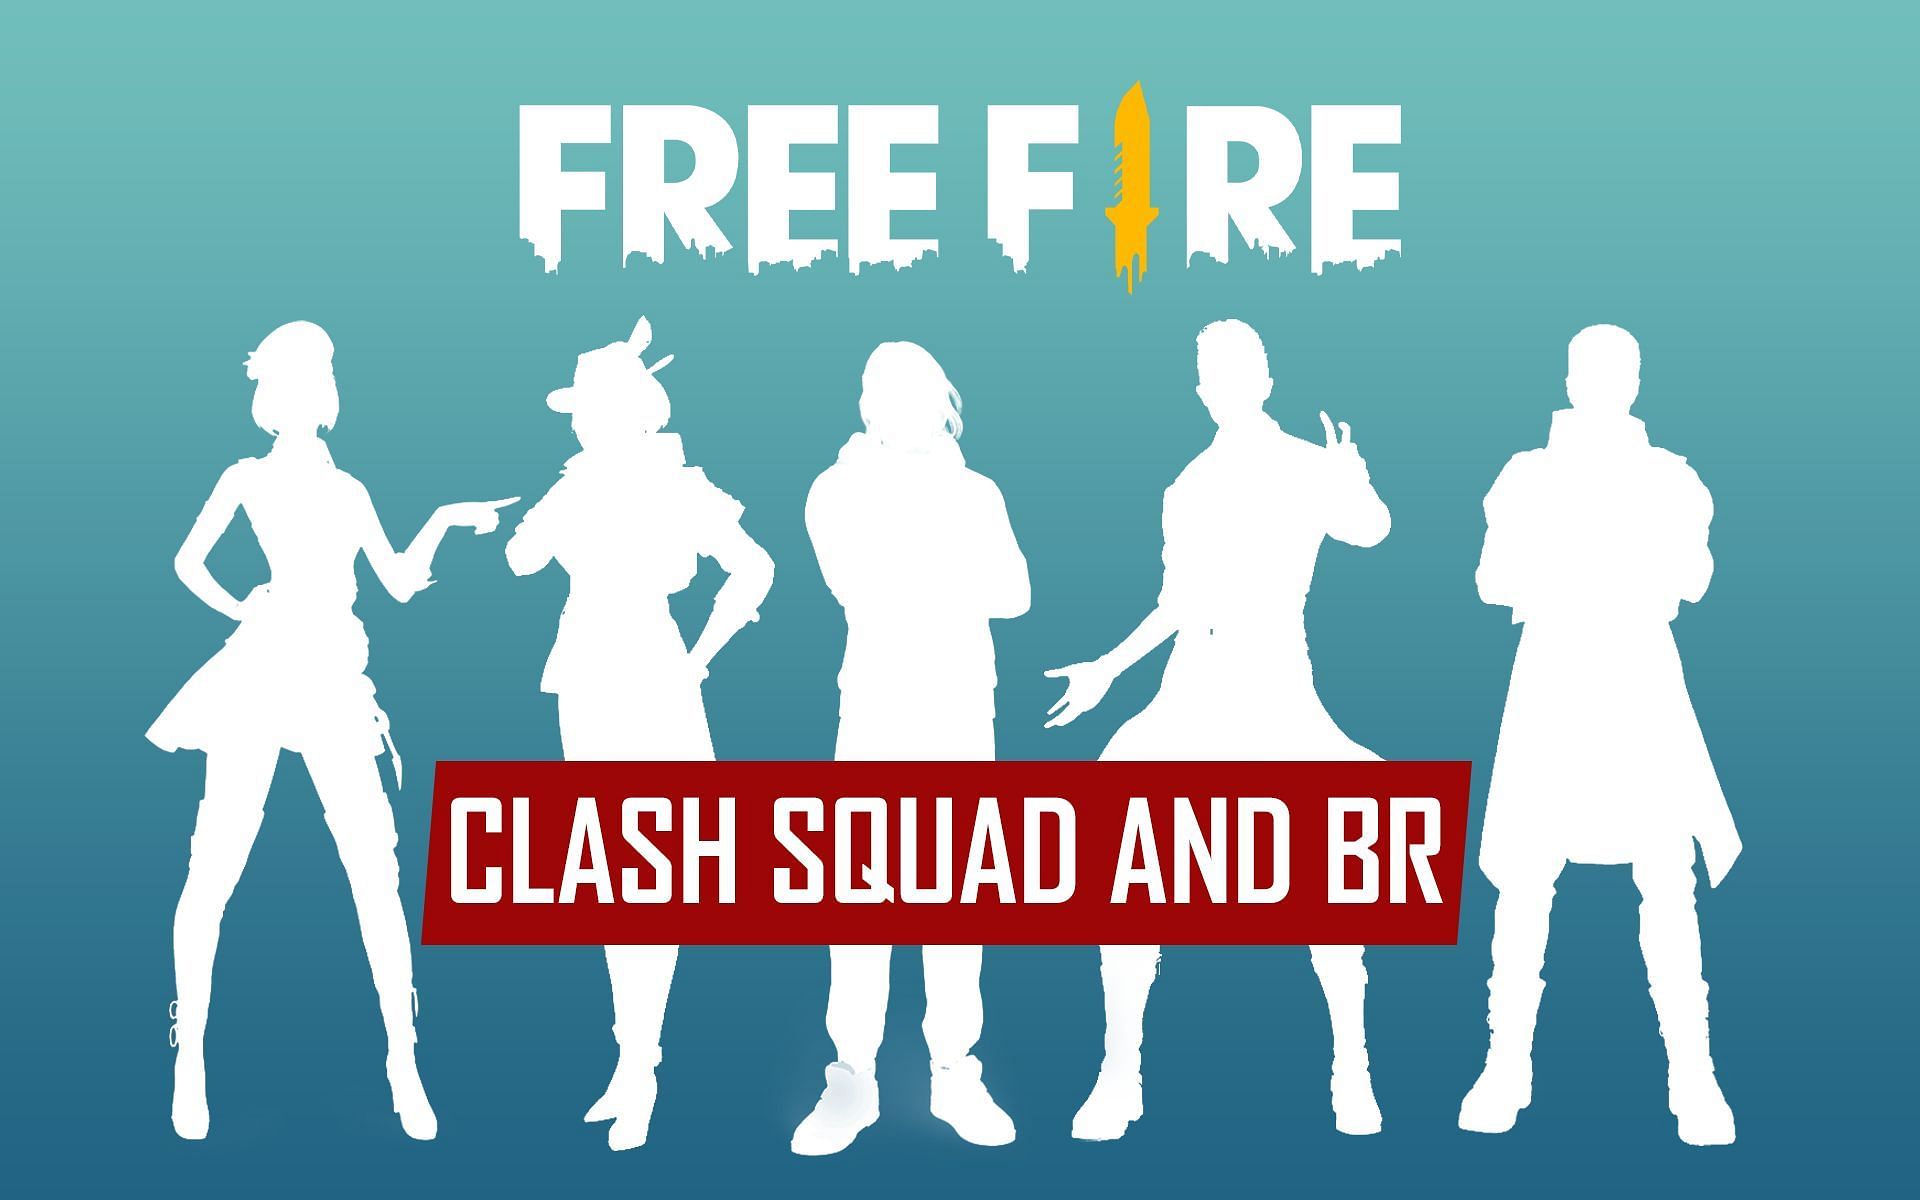 Characters suitable for both BR and Clash Squad matches in Free Fire (Image via Sportskeeda)